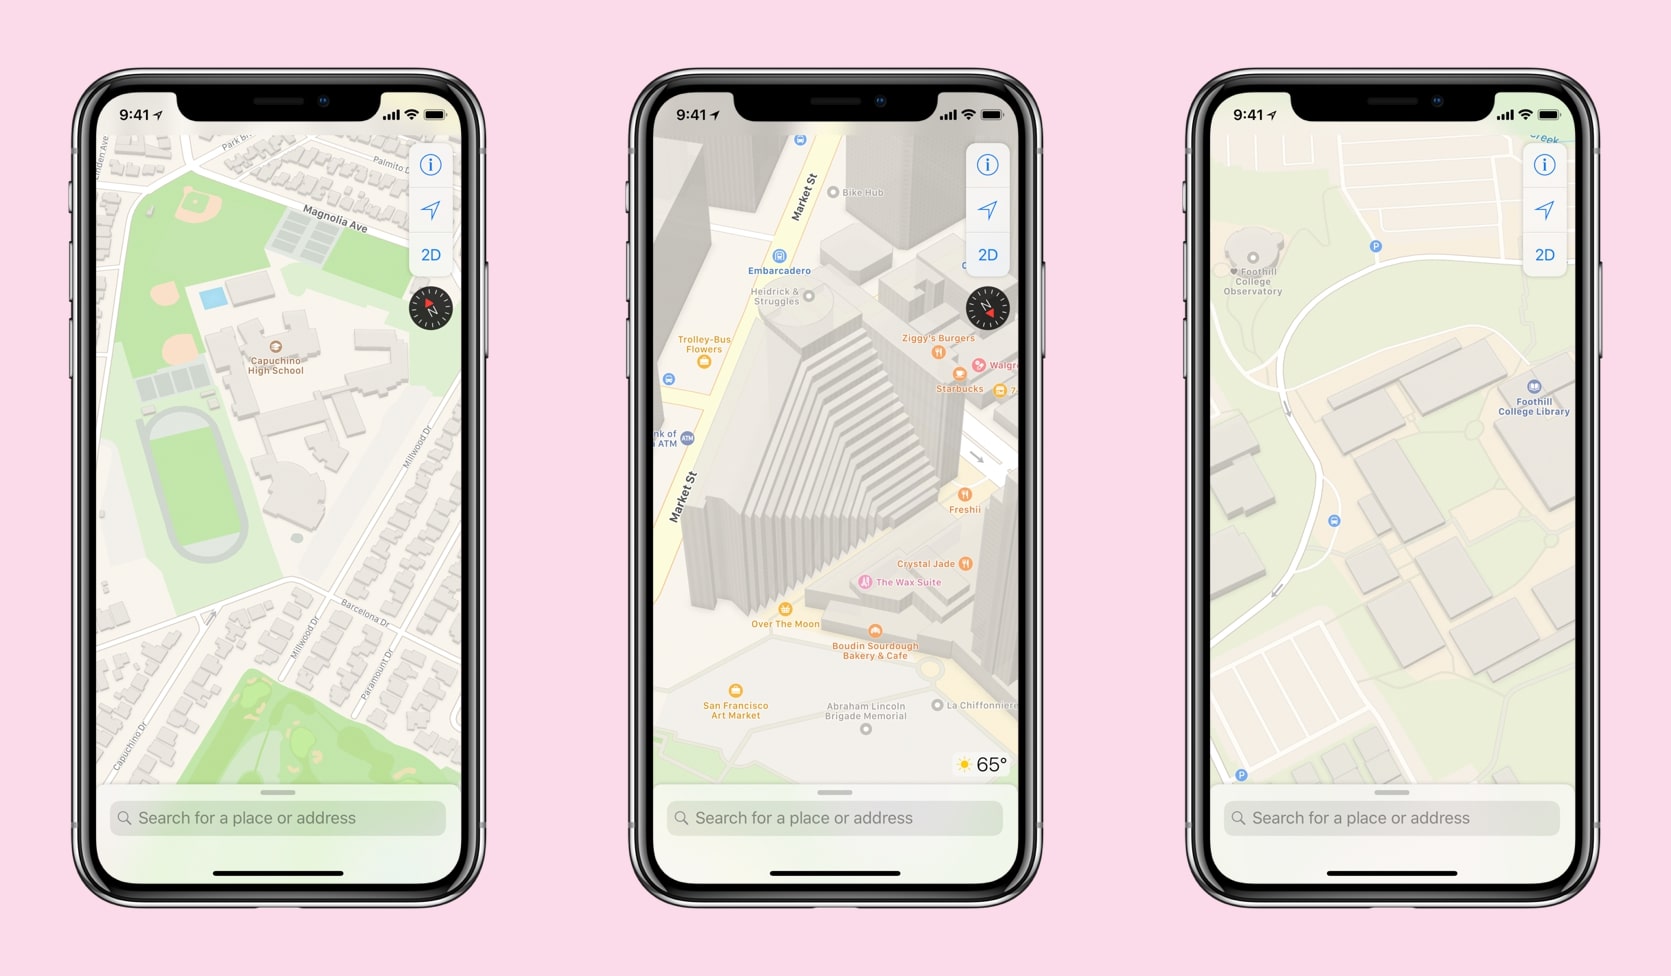 Apple has taken to mapping San Francisco on foot